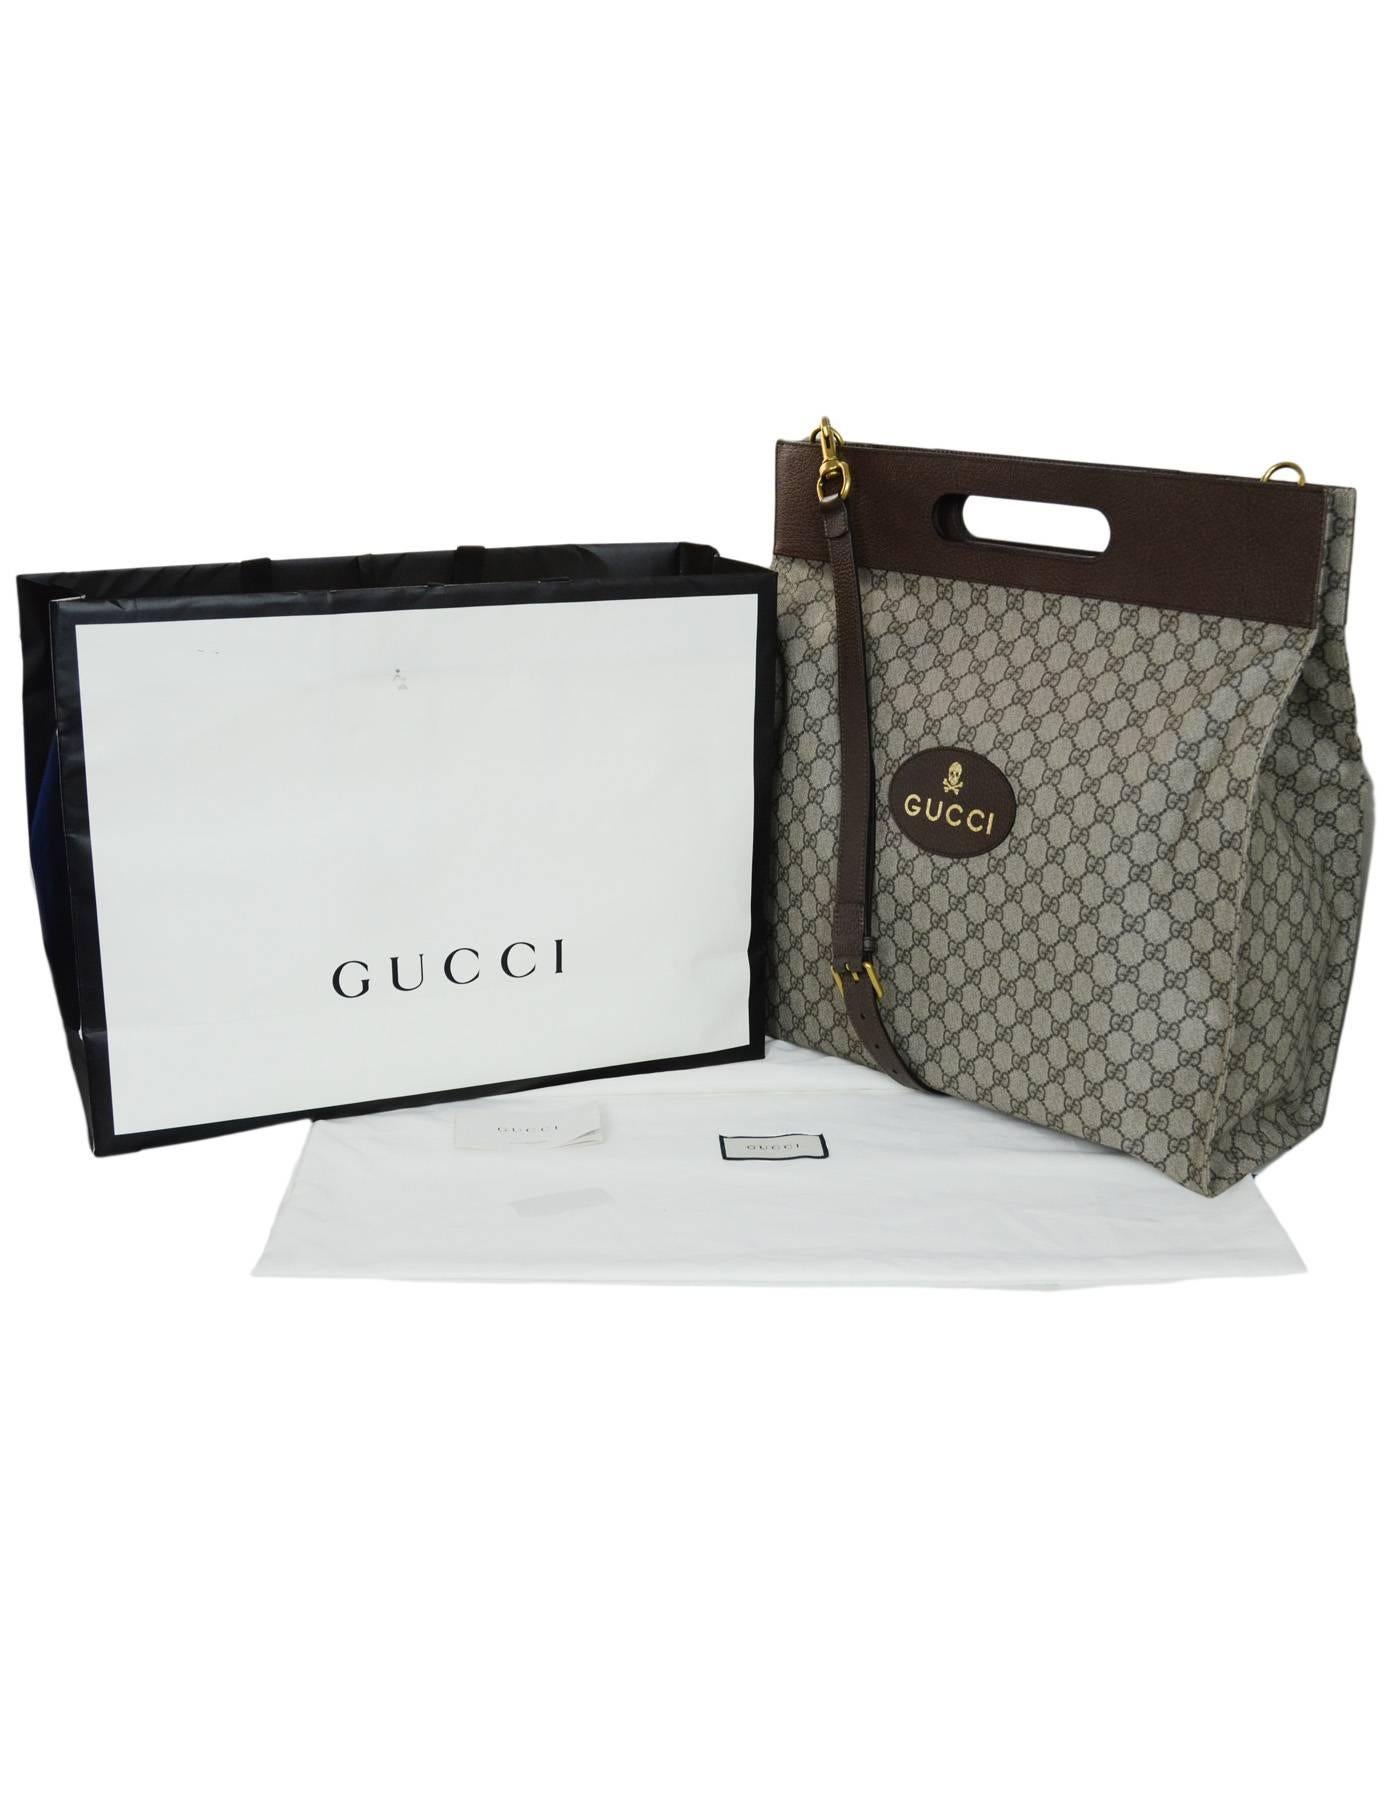 Gucci Soft GG Supreme XL Tote Bag with Dust Bag and Shopping Bag, Spring 2017  3